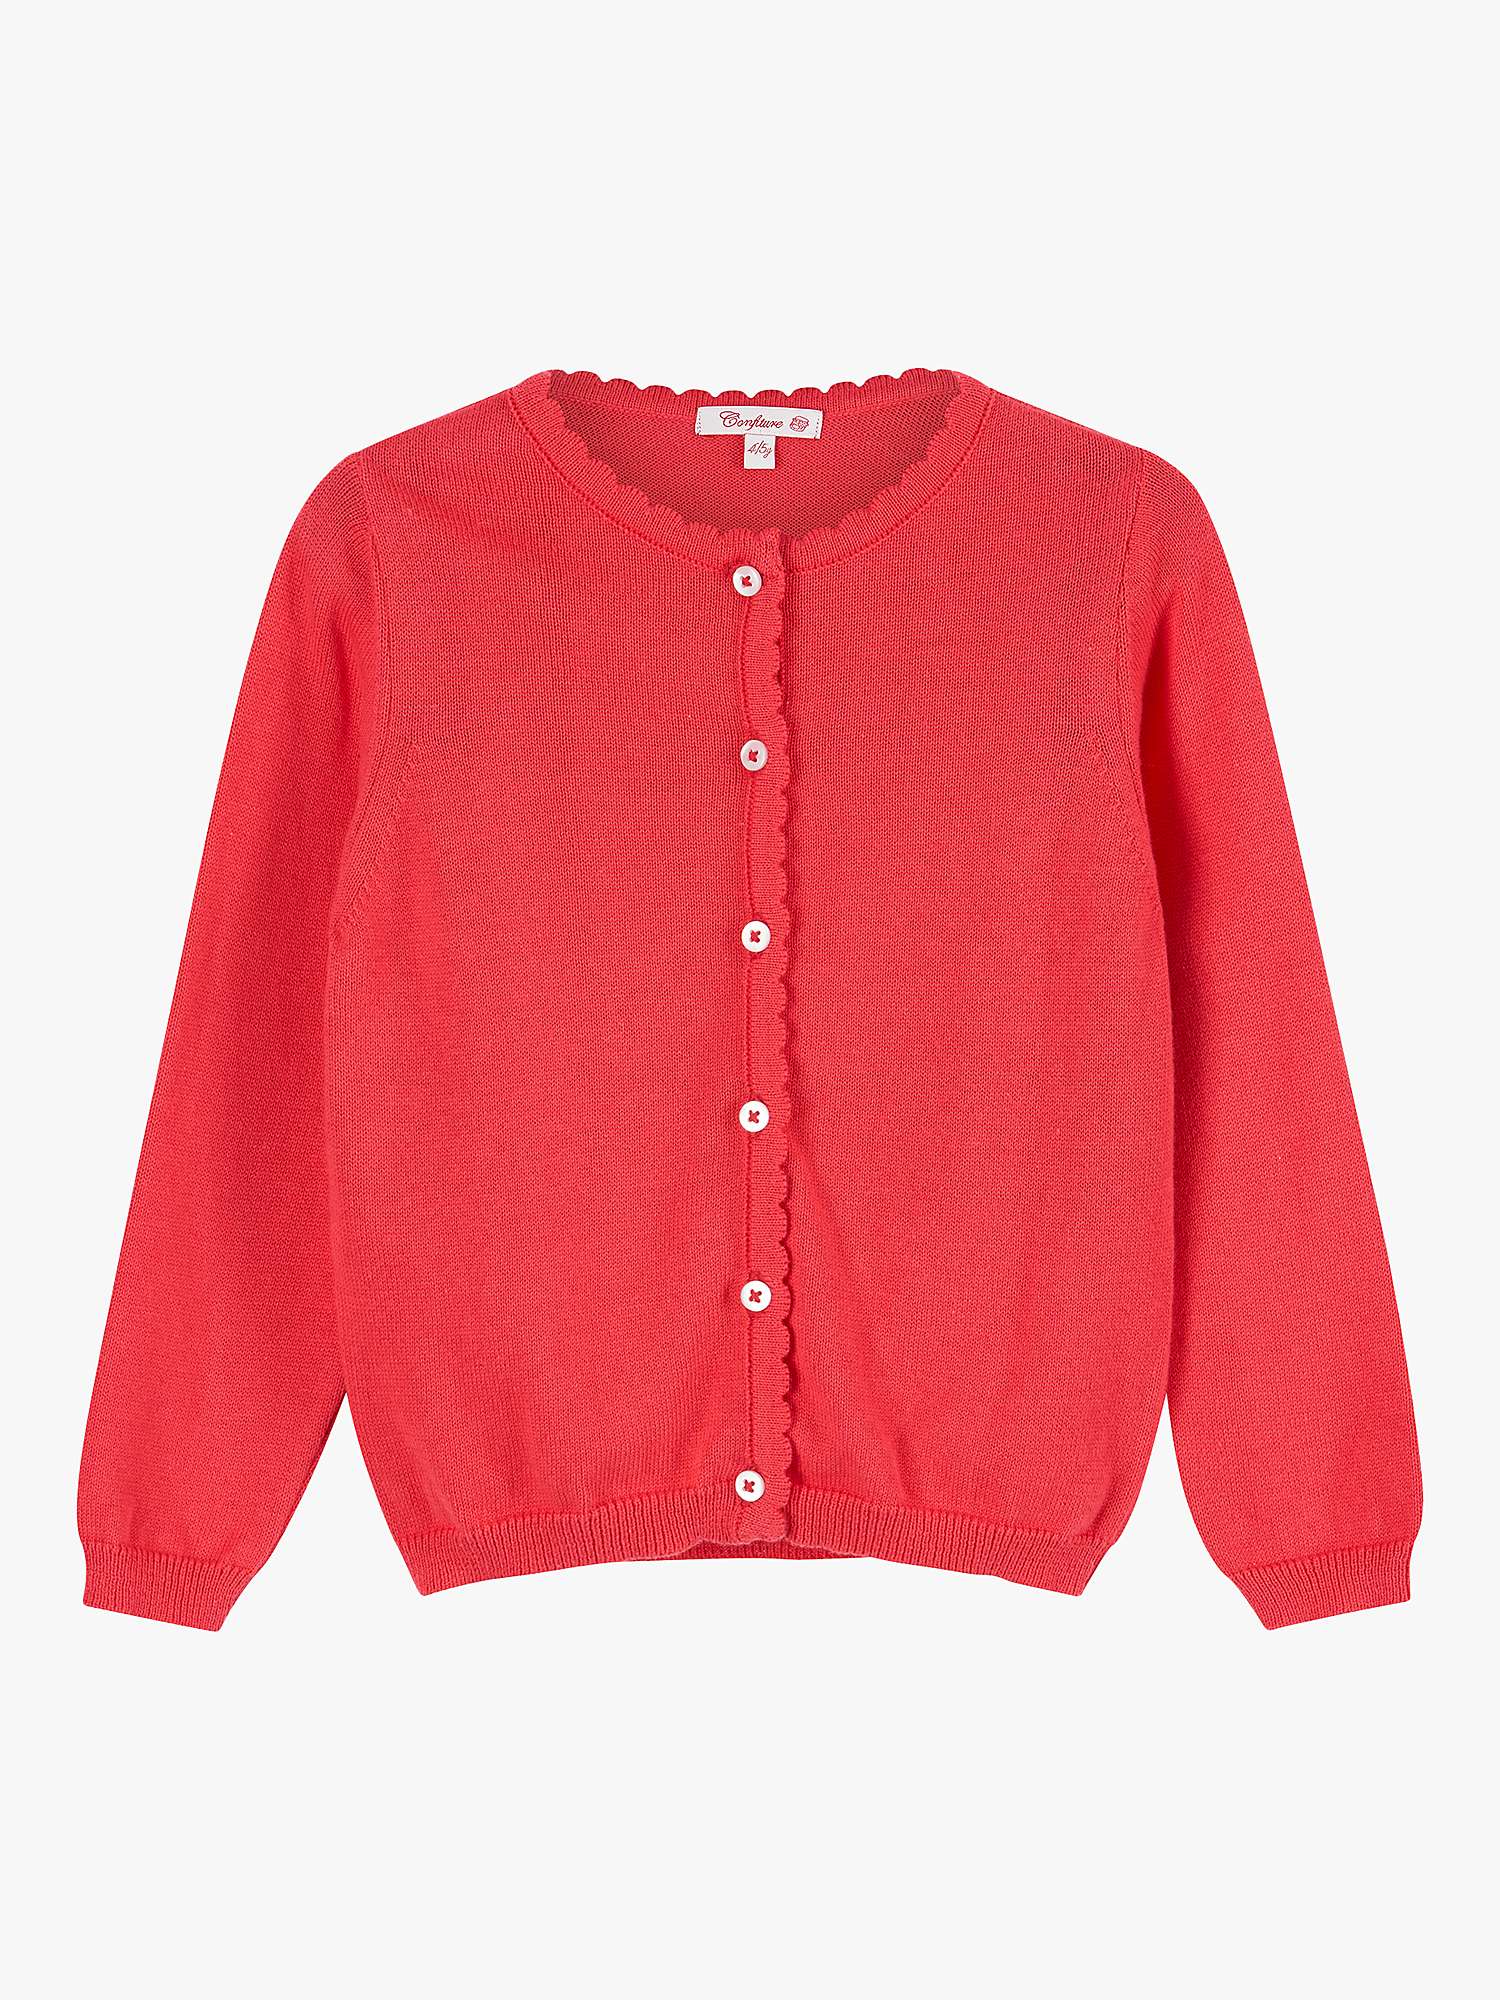 Buy Trotters Kids' Scalloped Edge Cardigan, Watermelon Online at johnlewis.com